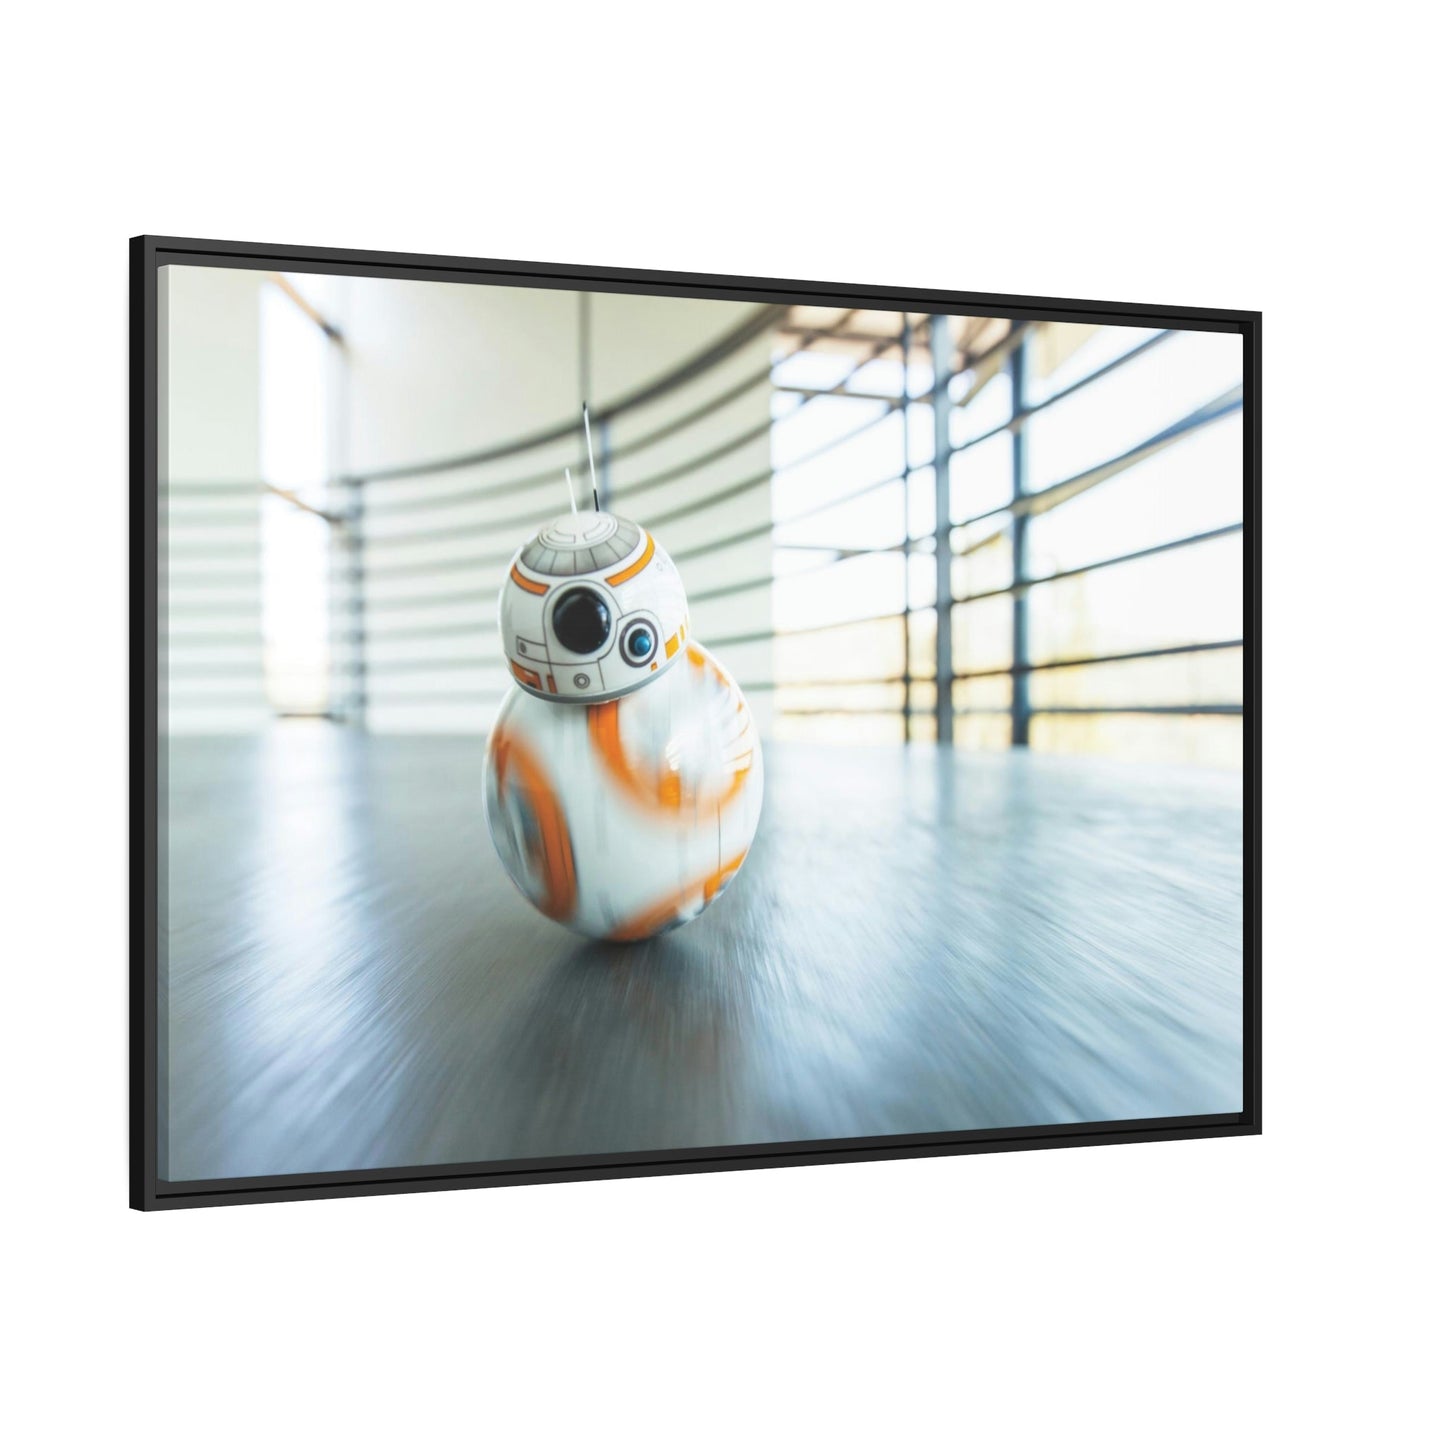 The Droid Chronicles: Framed Canvas & Poster Art Depicting the Star Wars Robot's Story